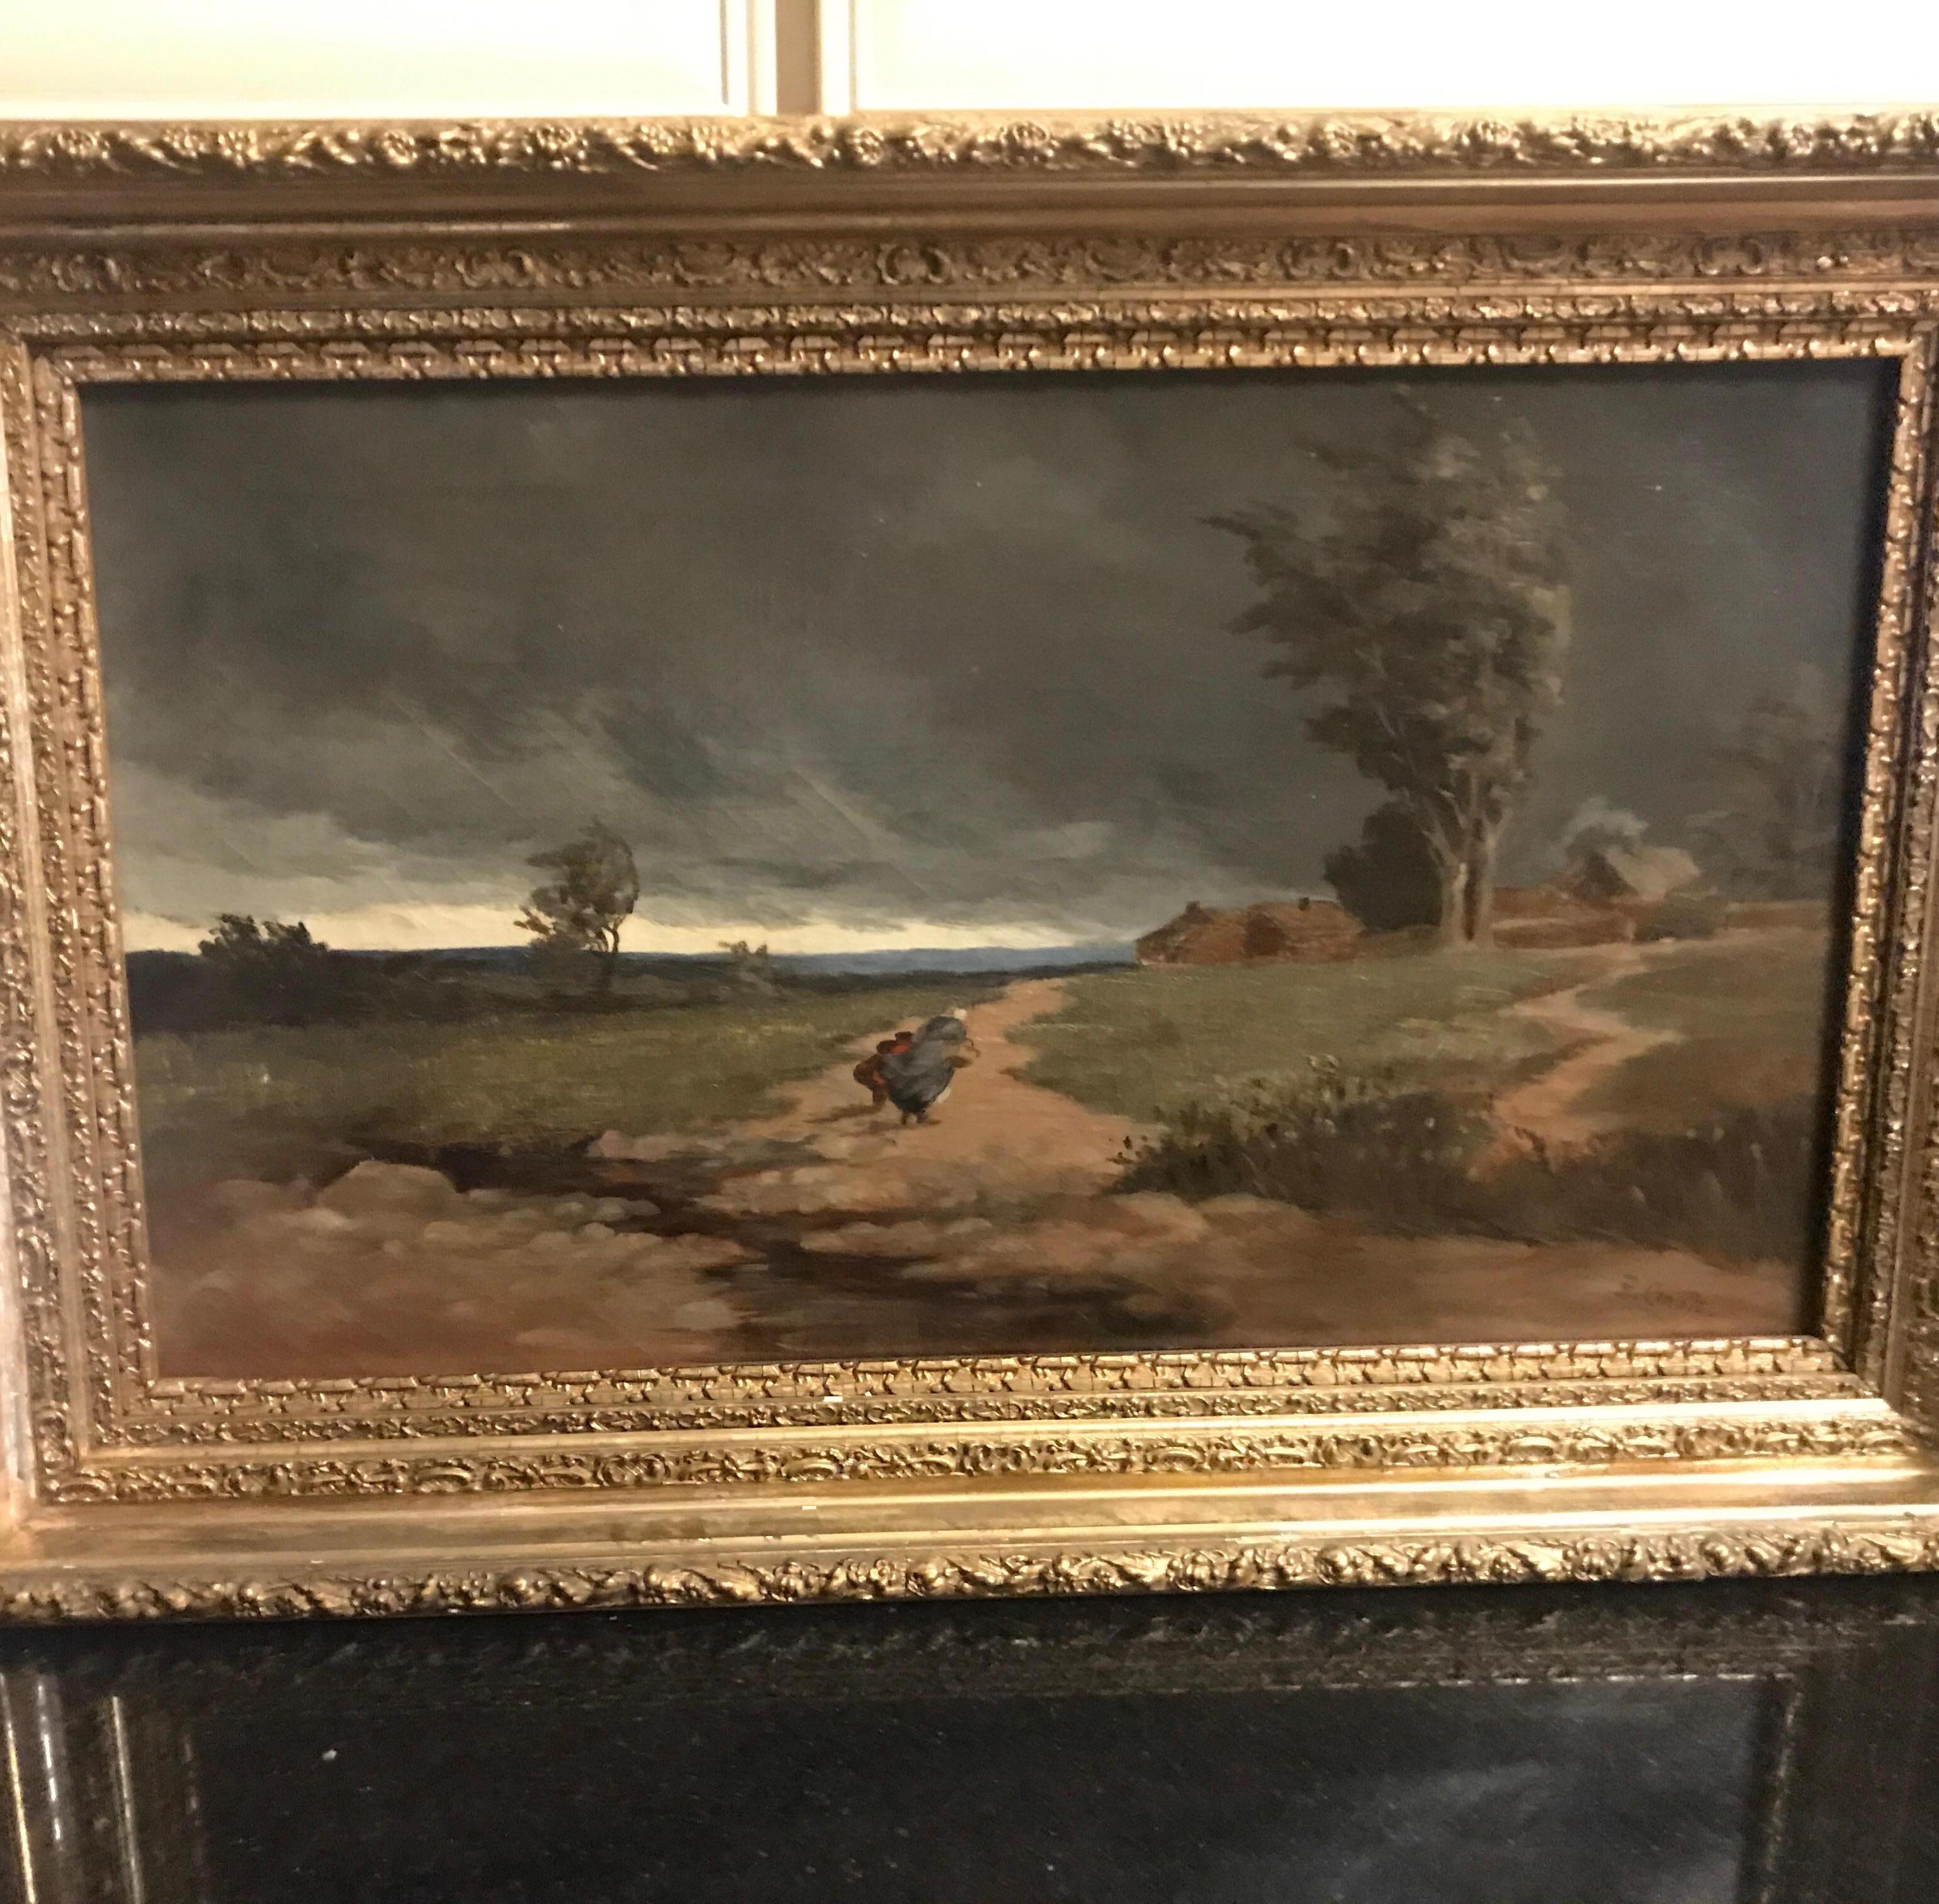 European 19th Century Oil Painting ”Approaching Storm” Signed B. Condit Original Frame